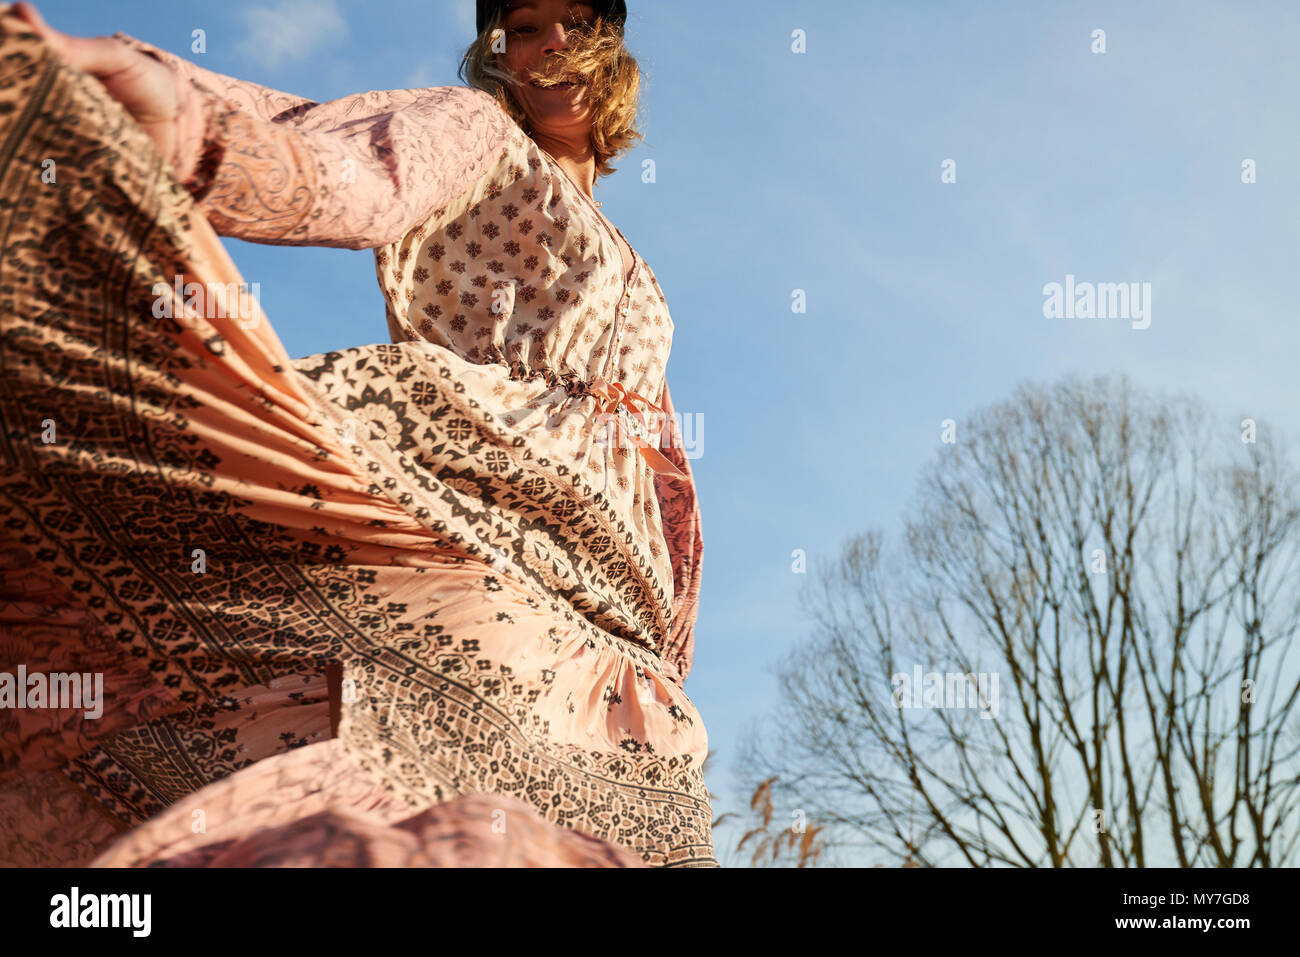 Hippy style woman dancing against blue sky, low angle view Stock Photo